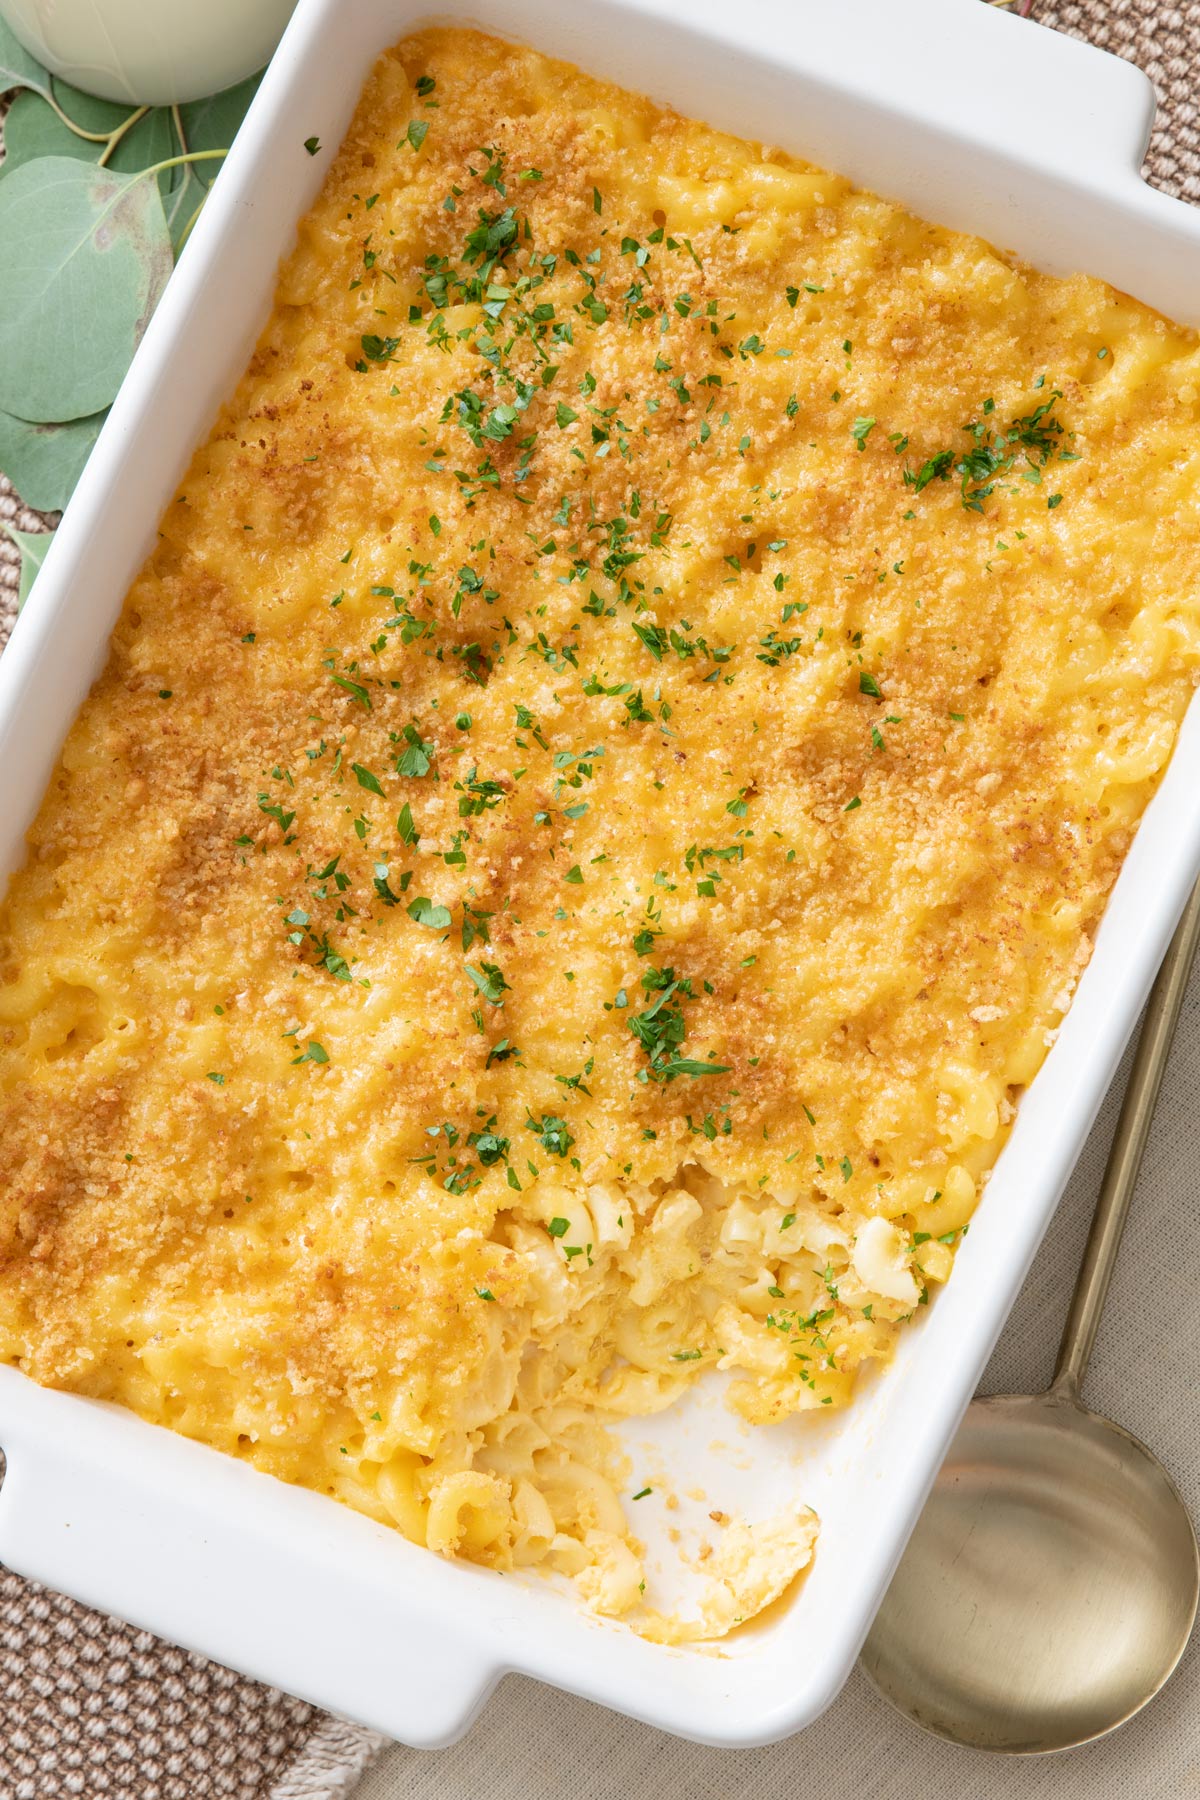 Large baking dish of baked macaroni cheese with breadcrumb topping, fresh herb garnishing, a serving spoon next to it with a scoop removed from dish.